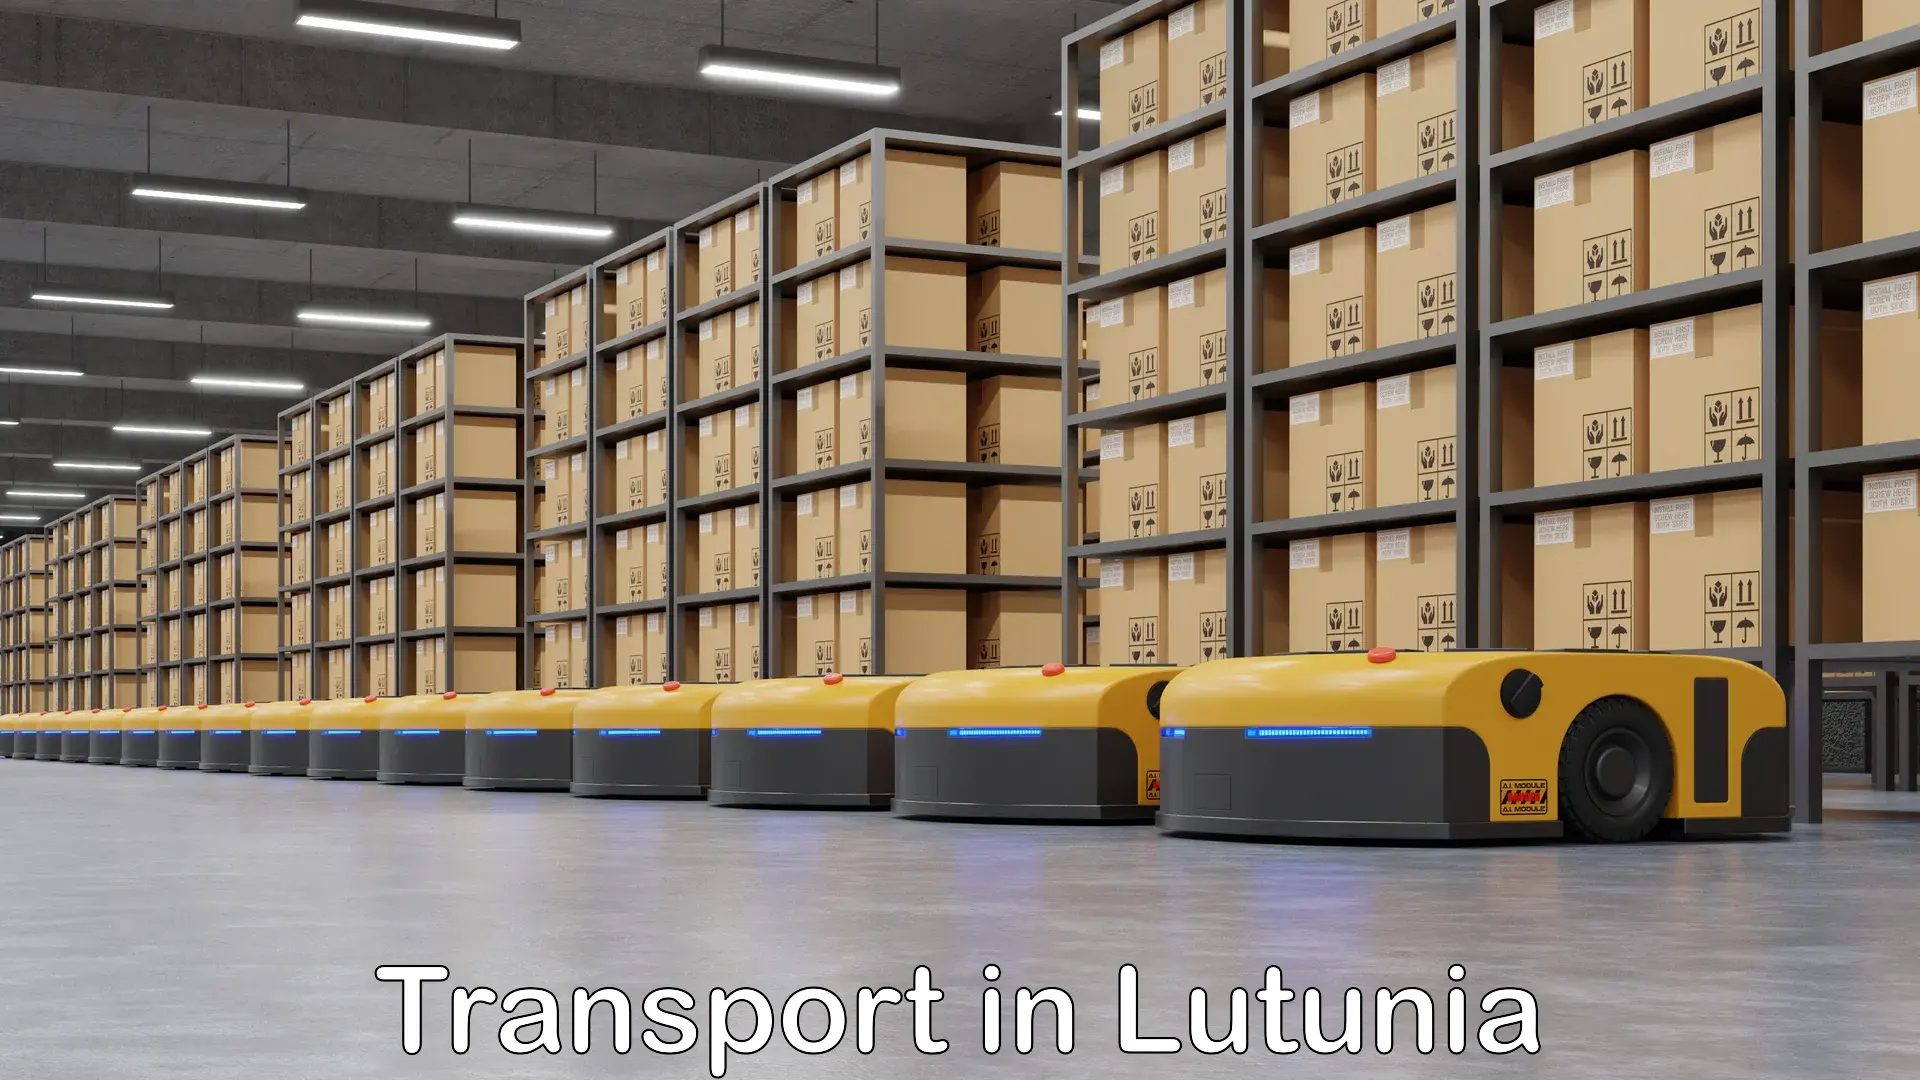 Two wheeler parcel service in Lutunia